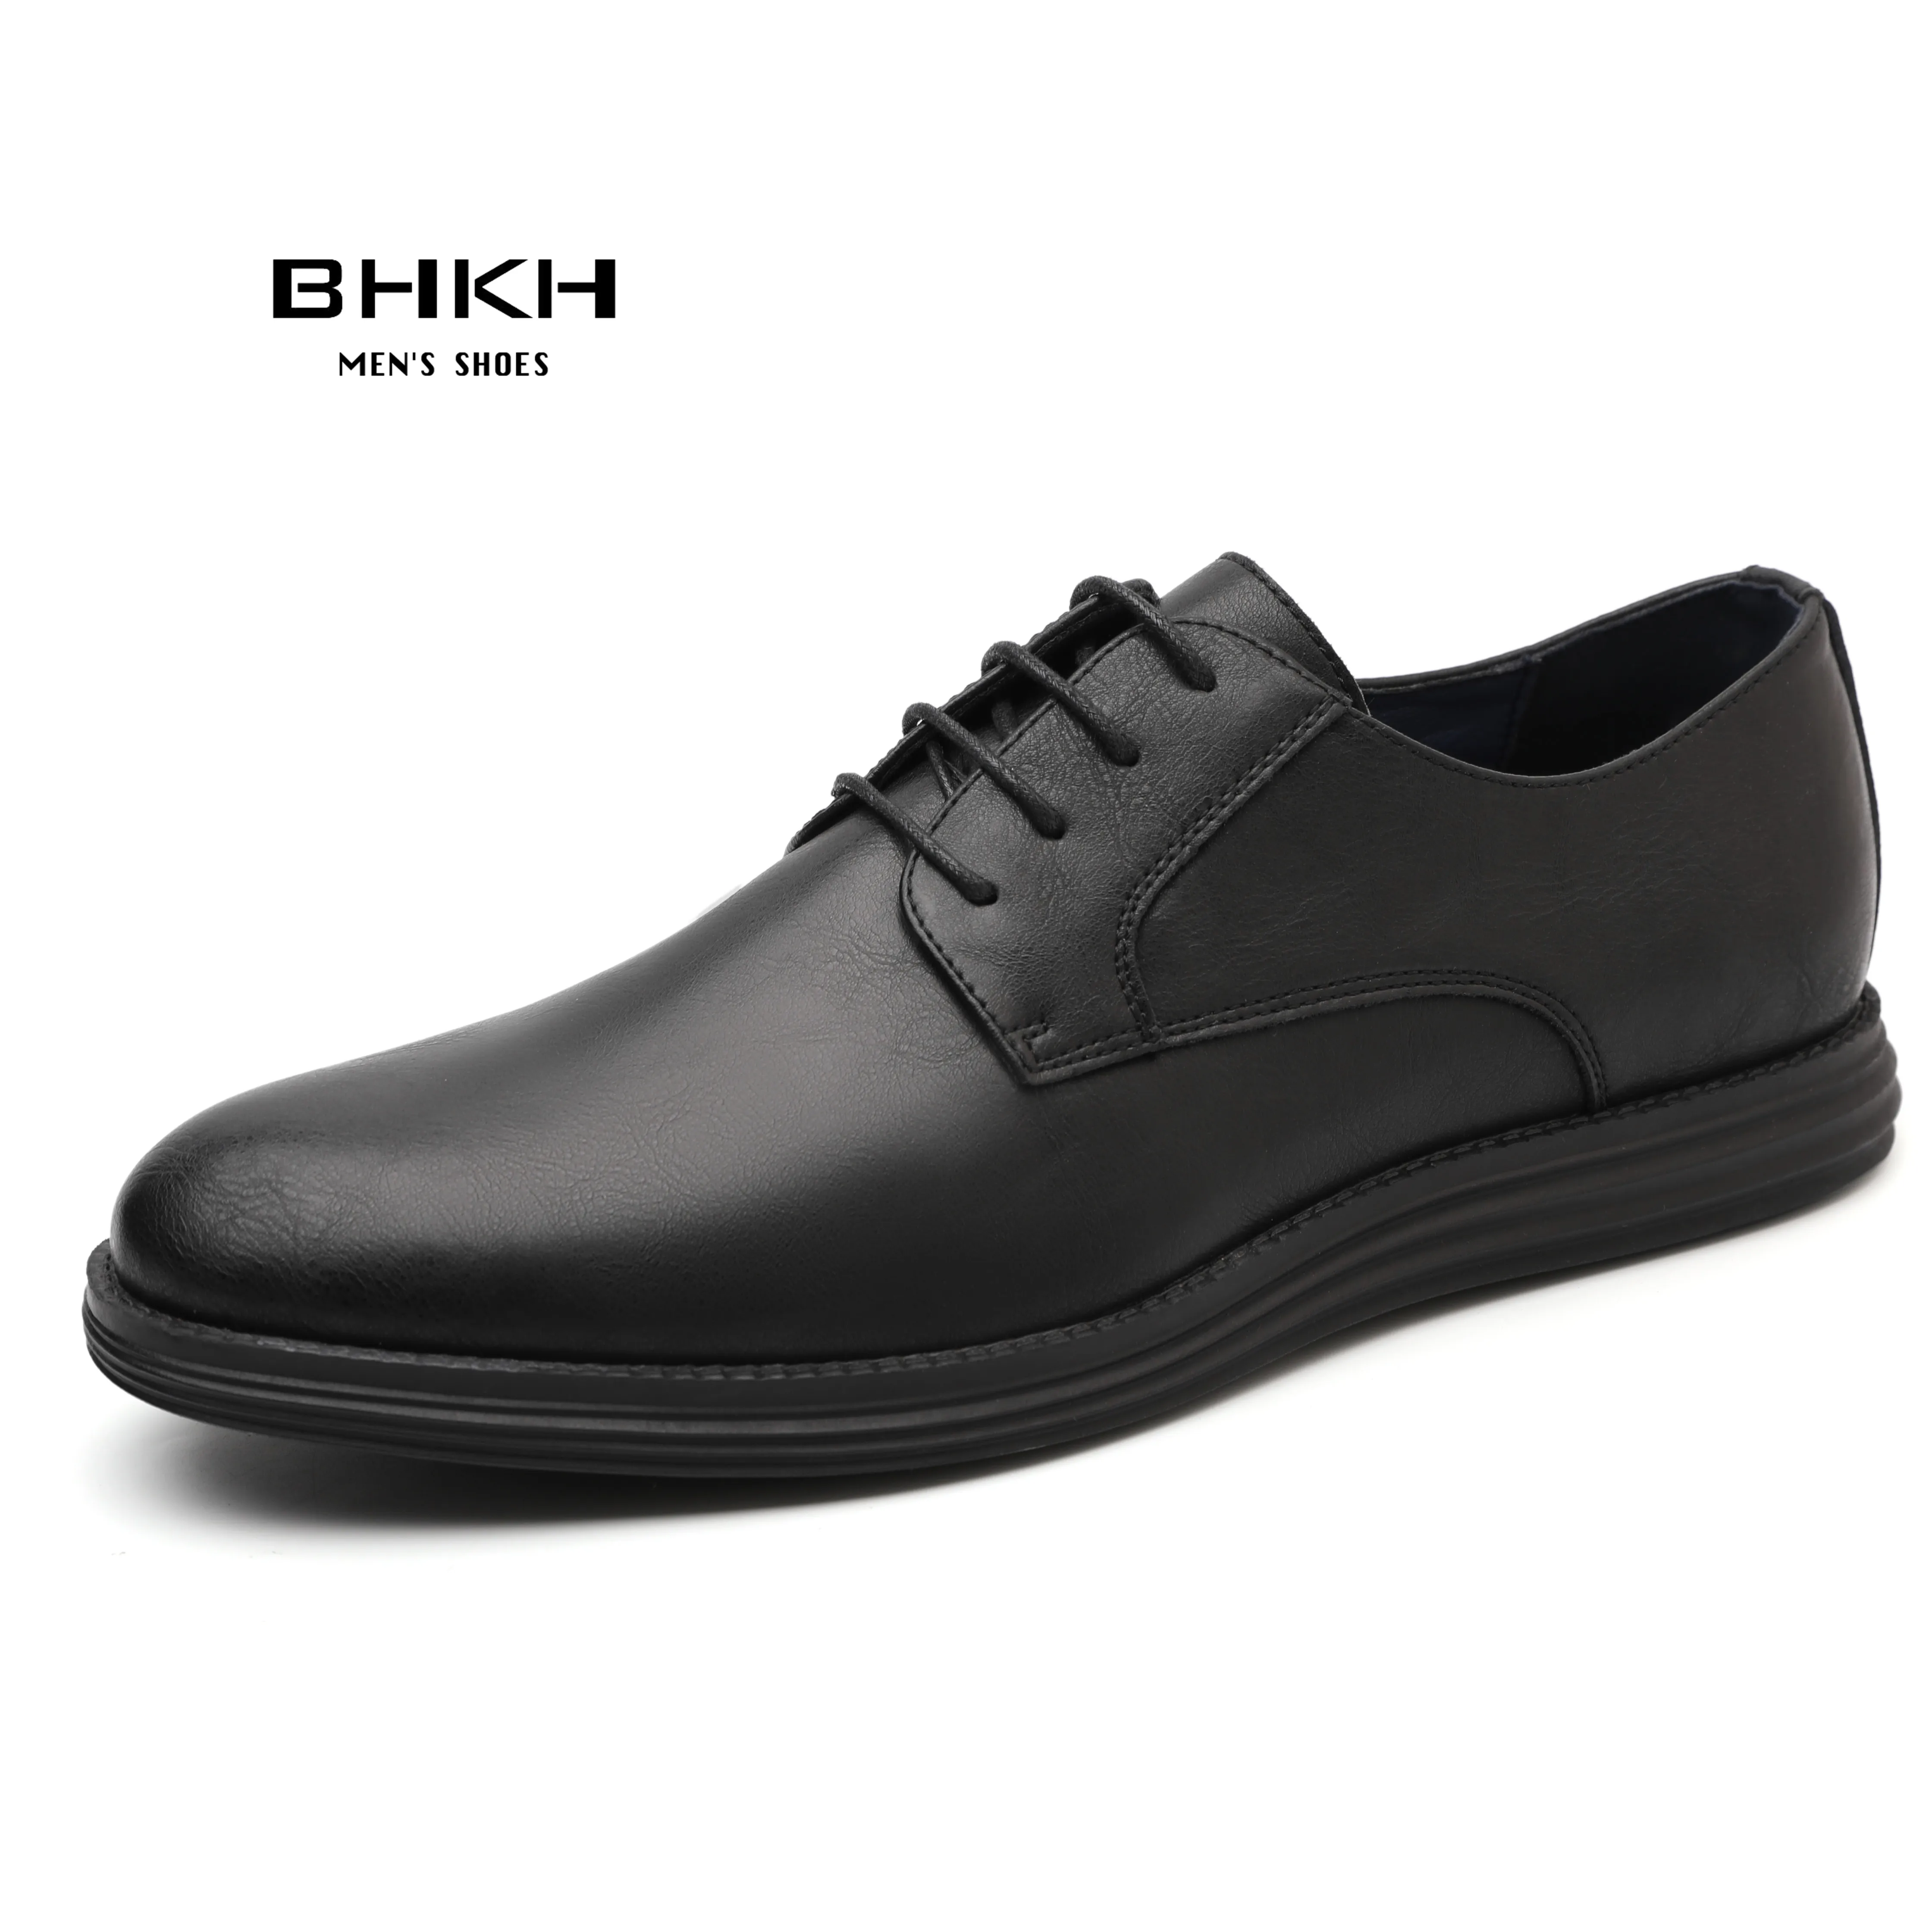 Leather Men Casual Shoes Smart Business Work Office Lace-up Dress Shoes ... - $73.14